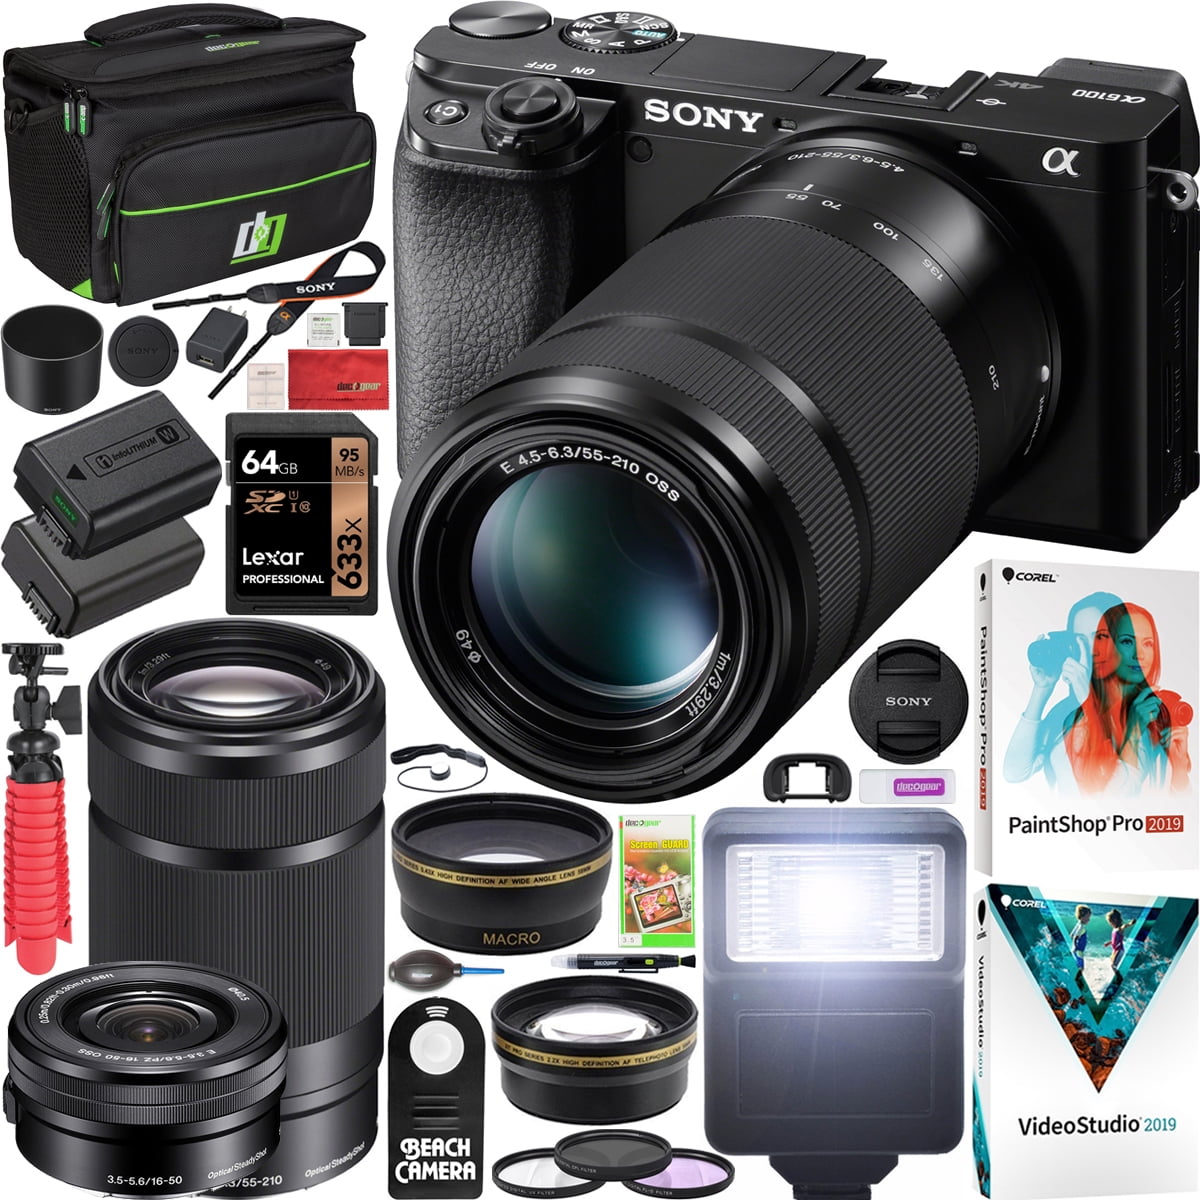 Sony a7III Full Frame Mirrorless Camera with FE 28-70mm F3.5-5.6 OSS Lens  Kit ILCE-7M3K/B Bundle with Telephoto and Wide-Angle Lens Set, 2X 64GB